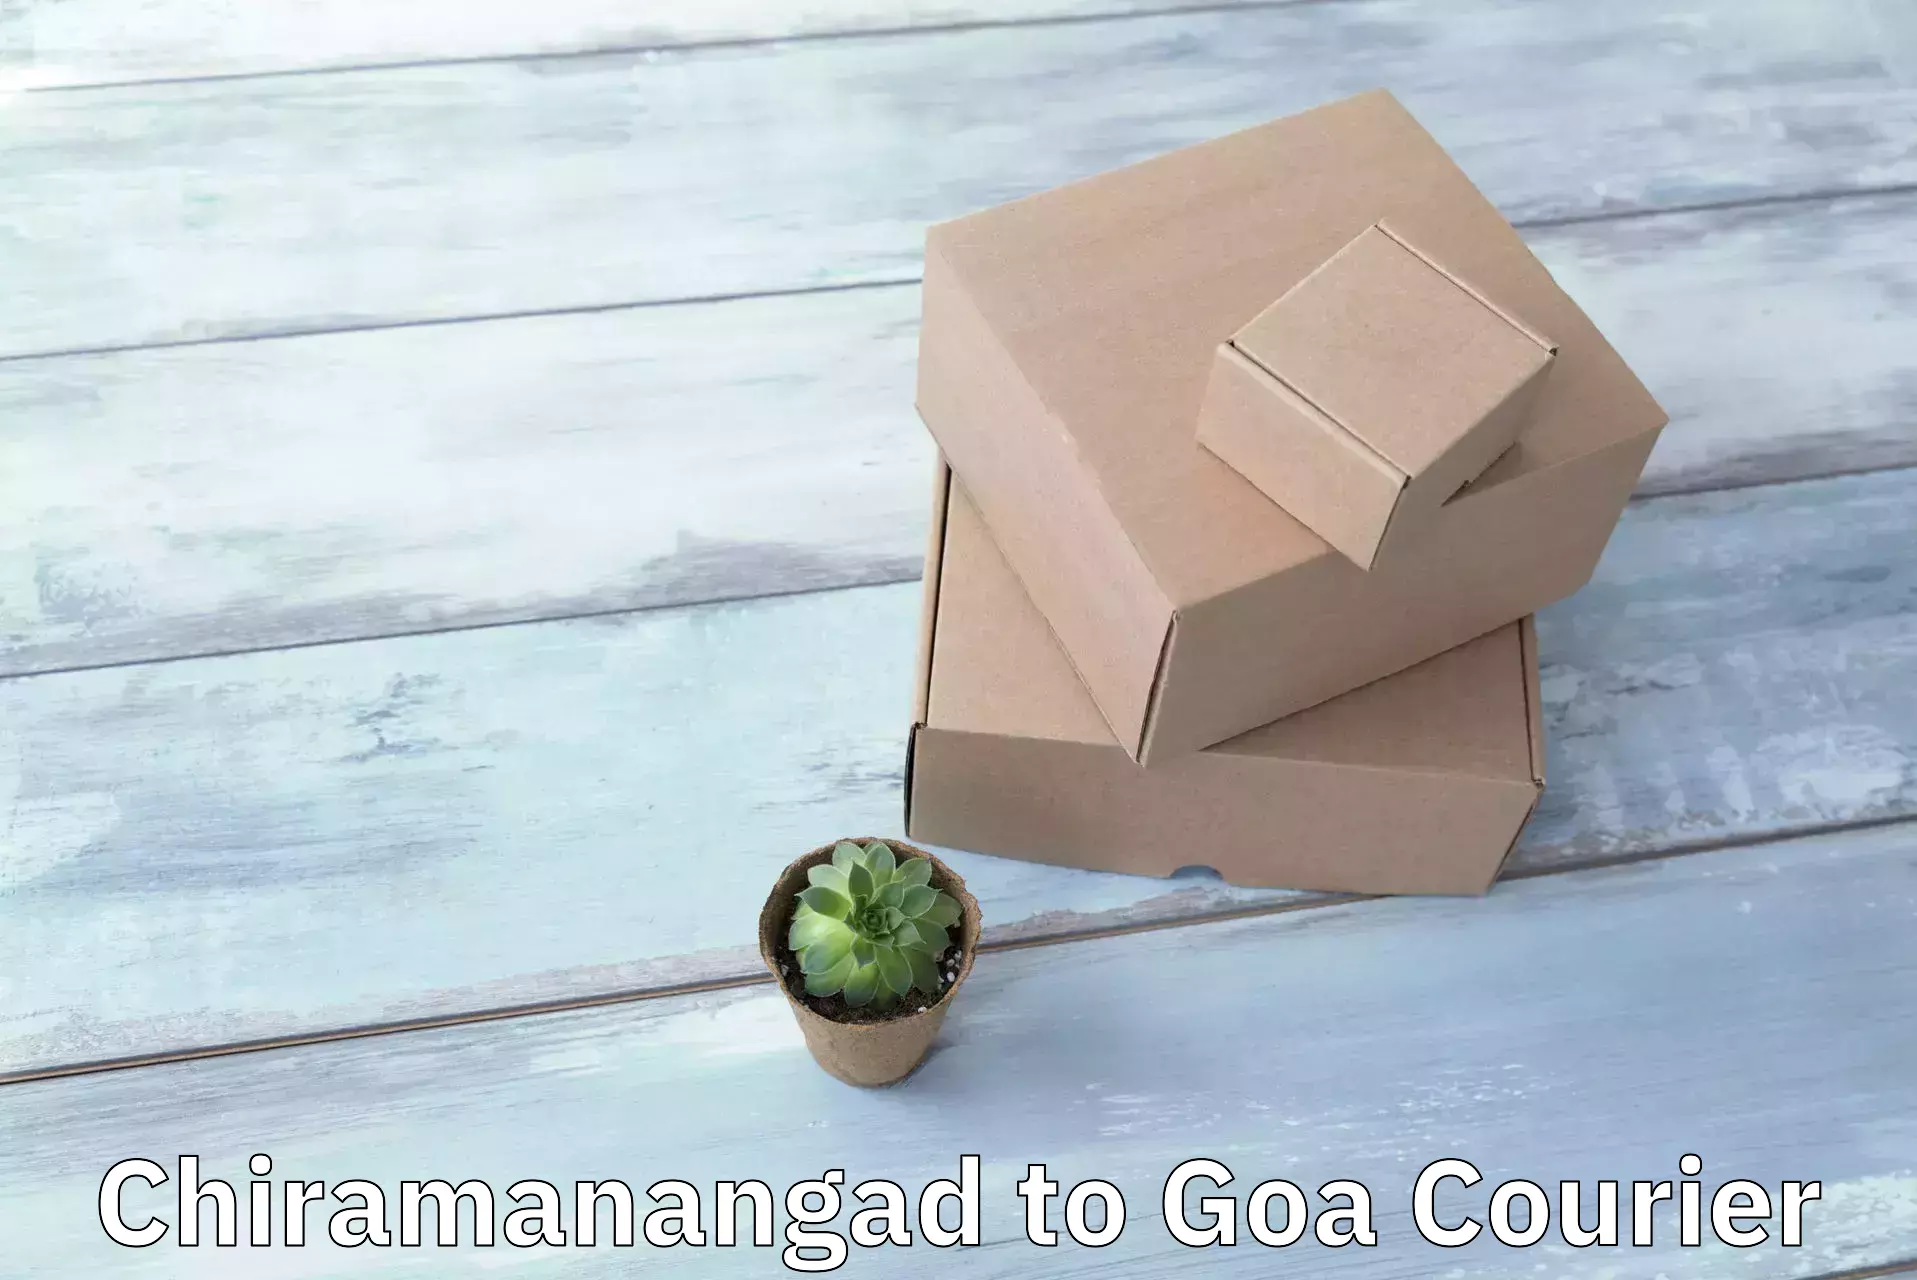 Fast delivery service in Chiramanangad to Goa